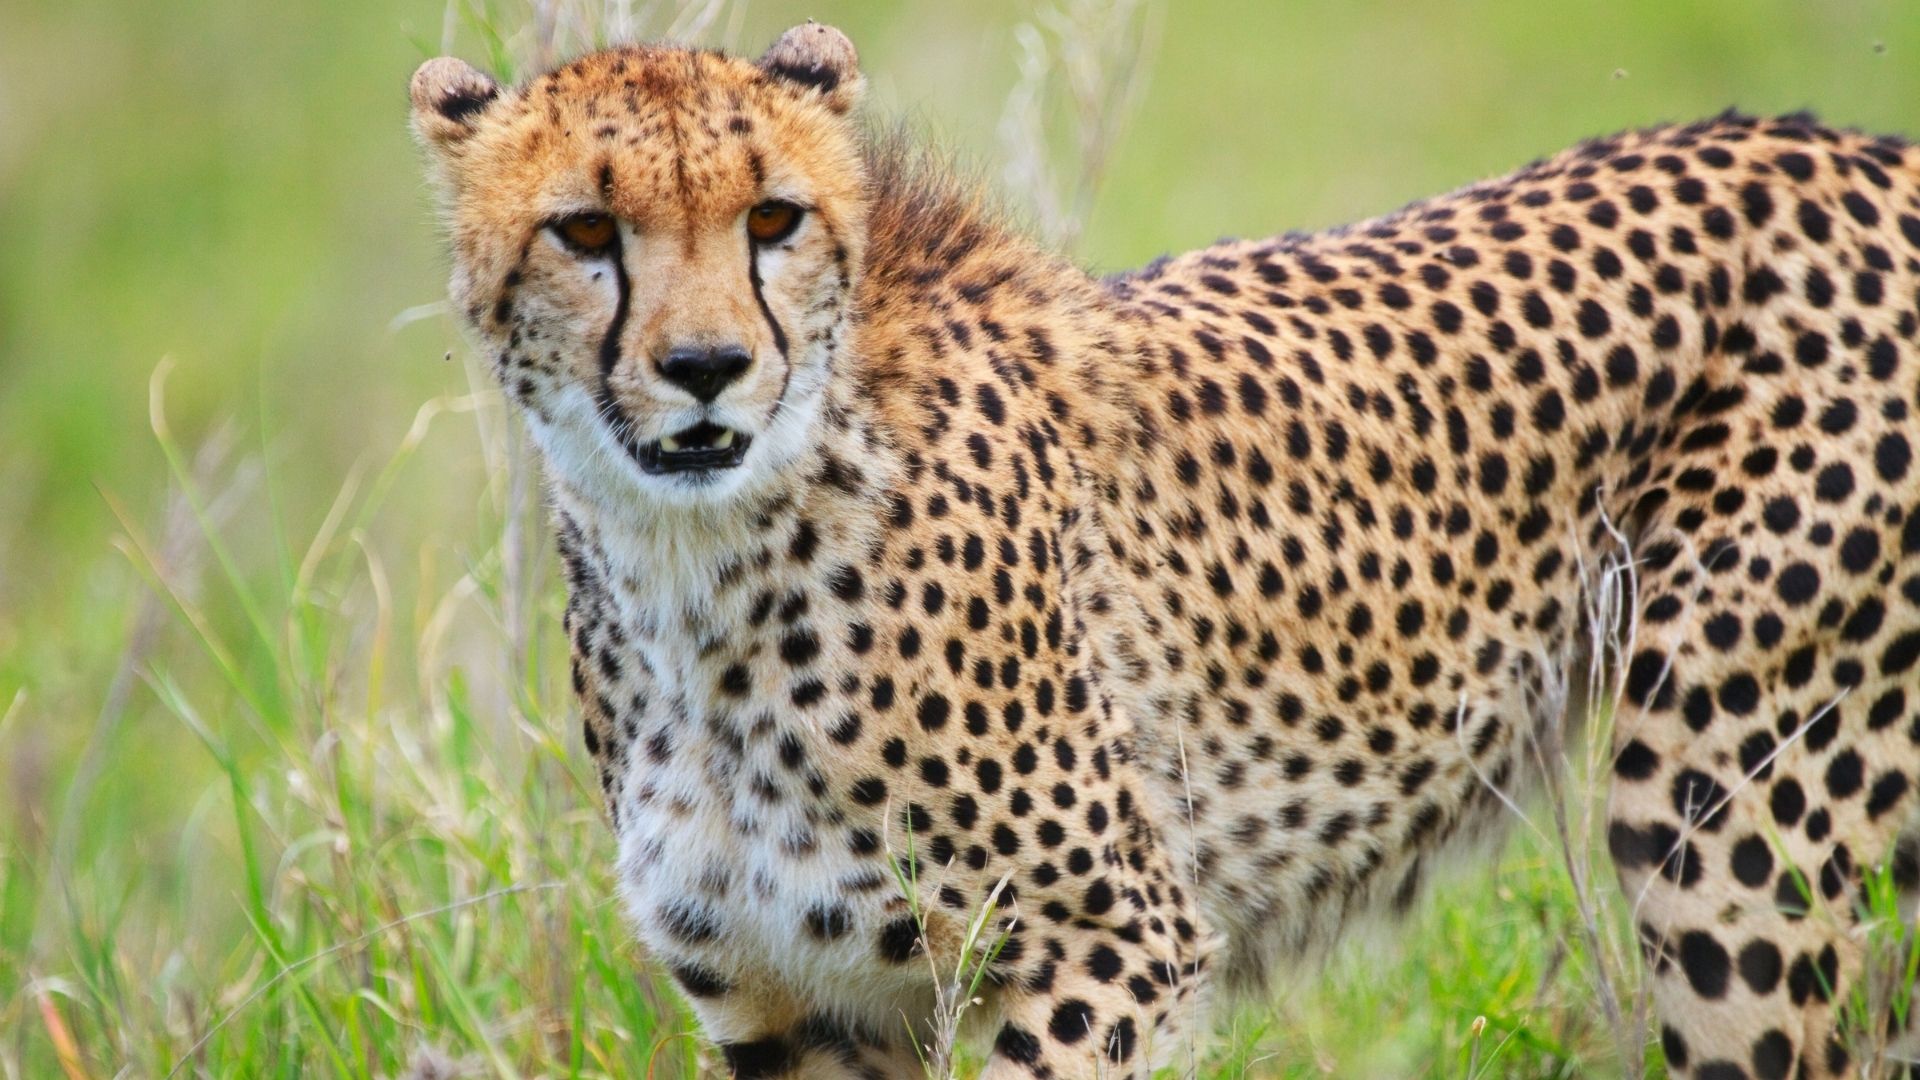 Knowledge Plus Episode 09 What Do You Know About Cheetahs